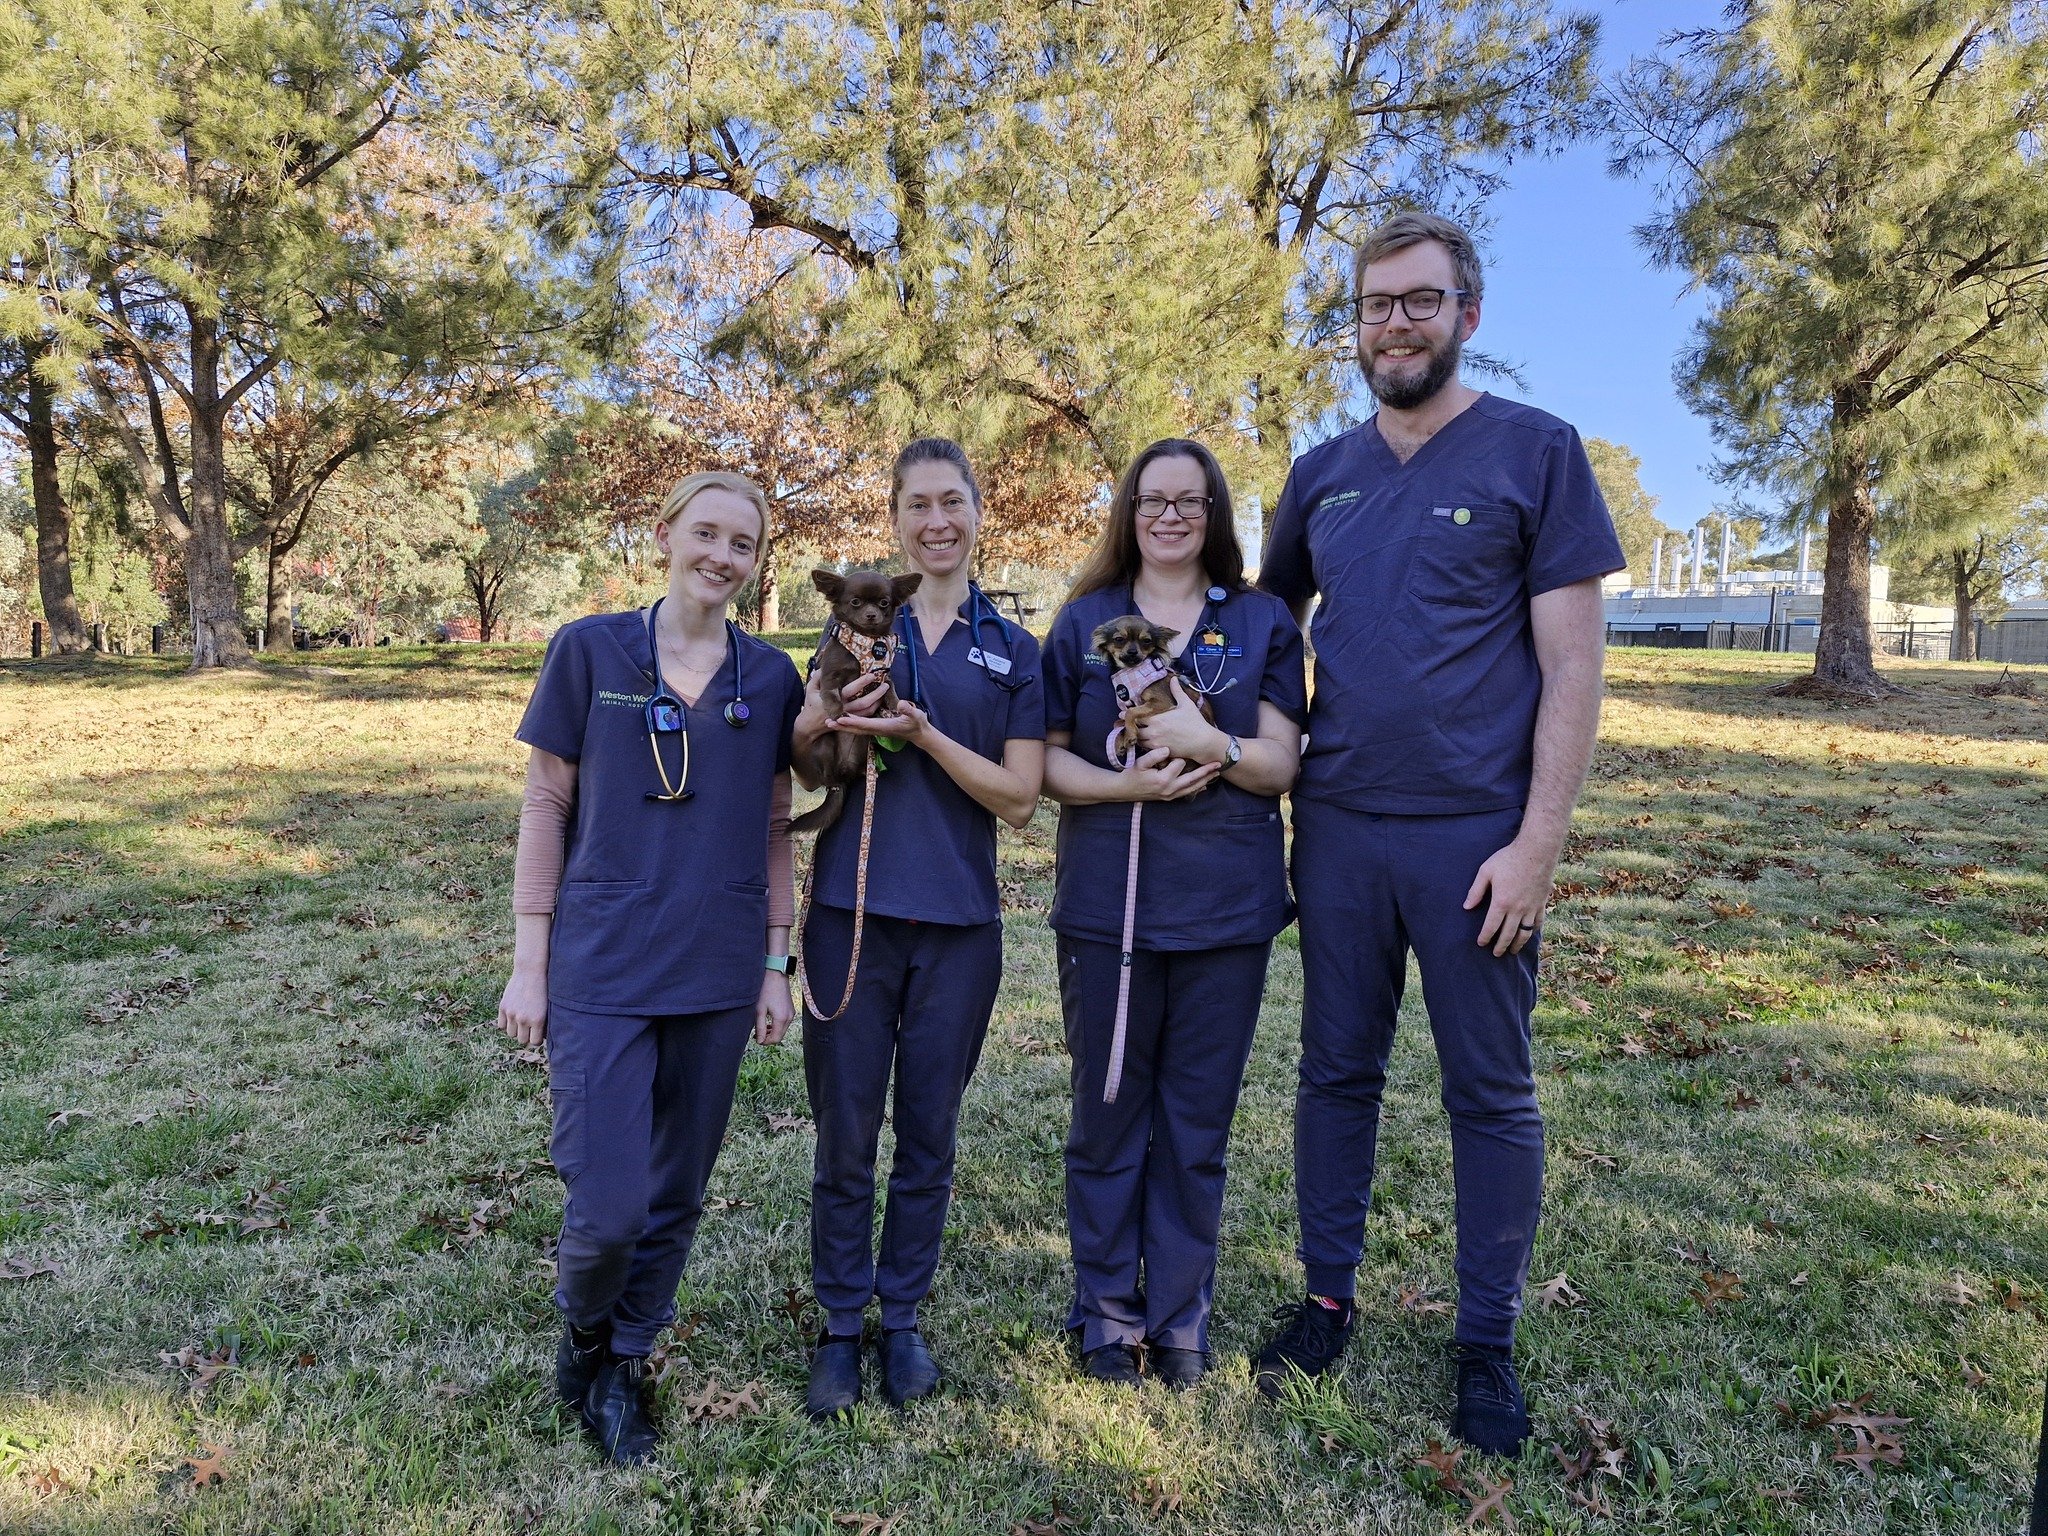 🩺HAPPY WORLD VETERINARY DAY 🩺

Due to a month of incredible work and demand for our amazing team, we've had to push celebrating World Veterinary Day back. We try to celebrate our Vets each and every day but it is important that they have a day to b